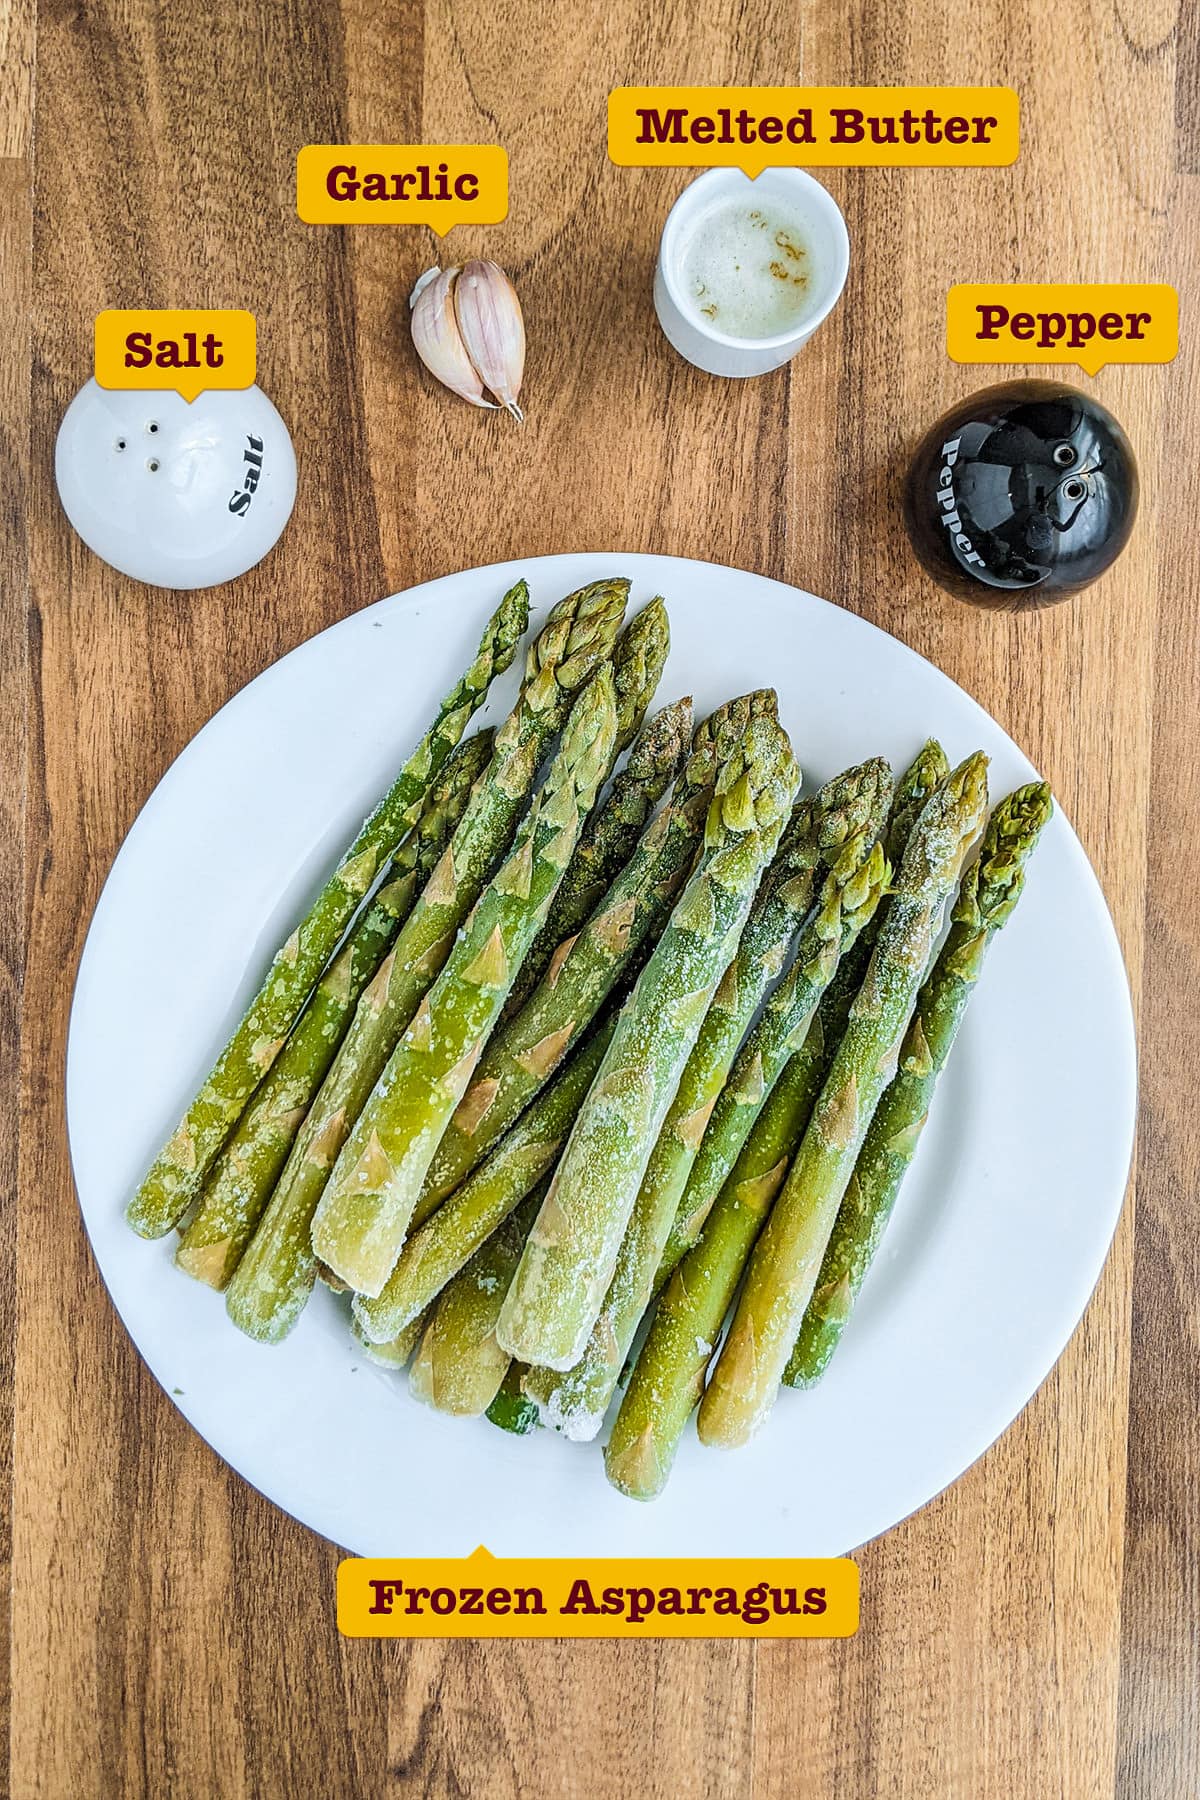 Frozen asparagus with garlic, melted butter, salt and pepper on a wooden table.